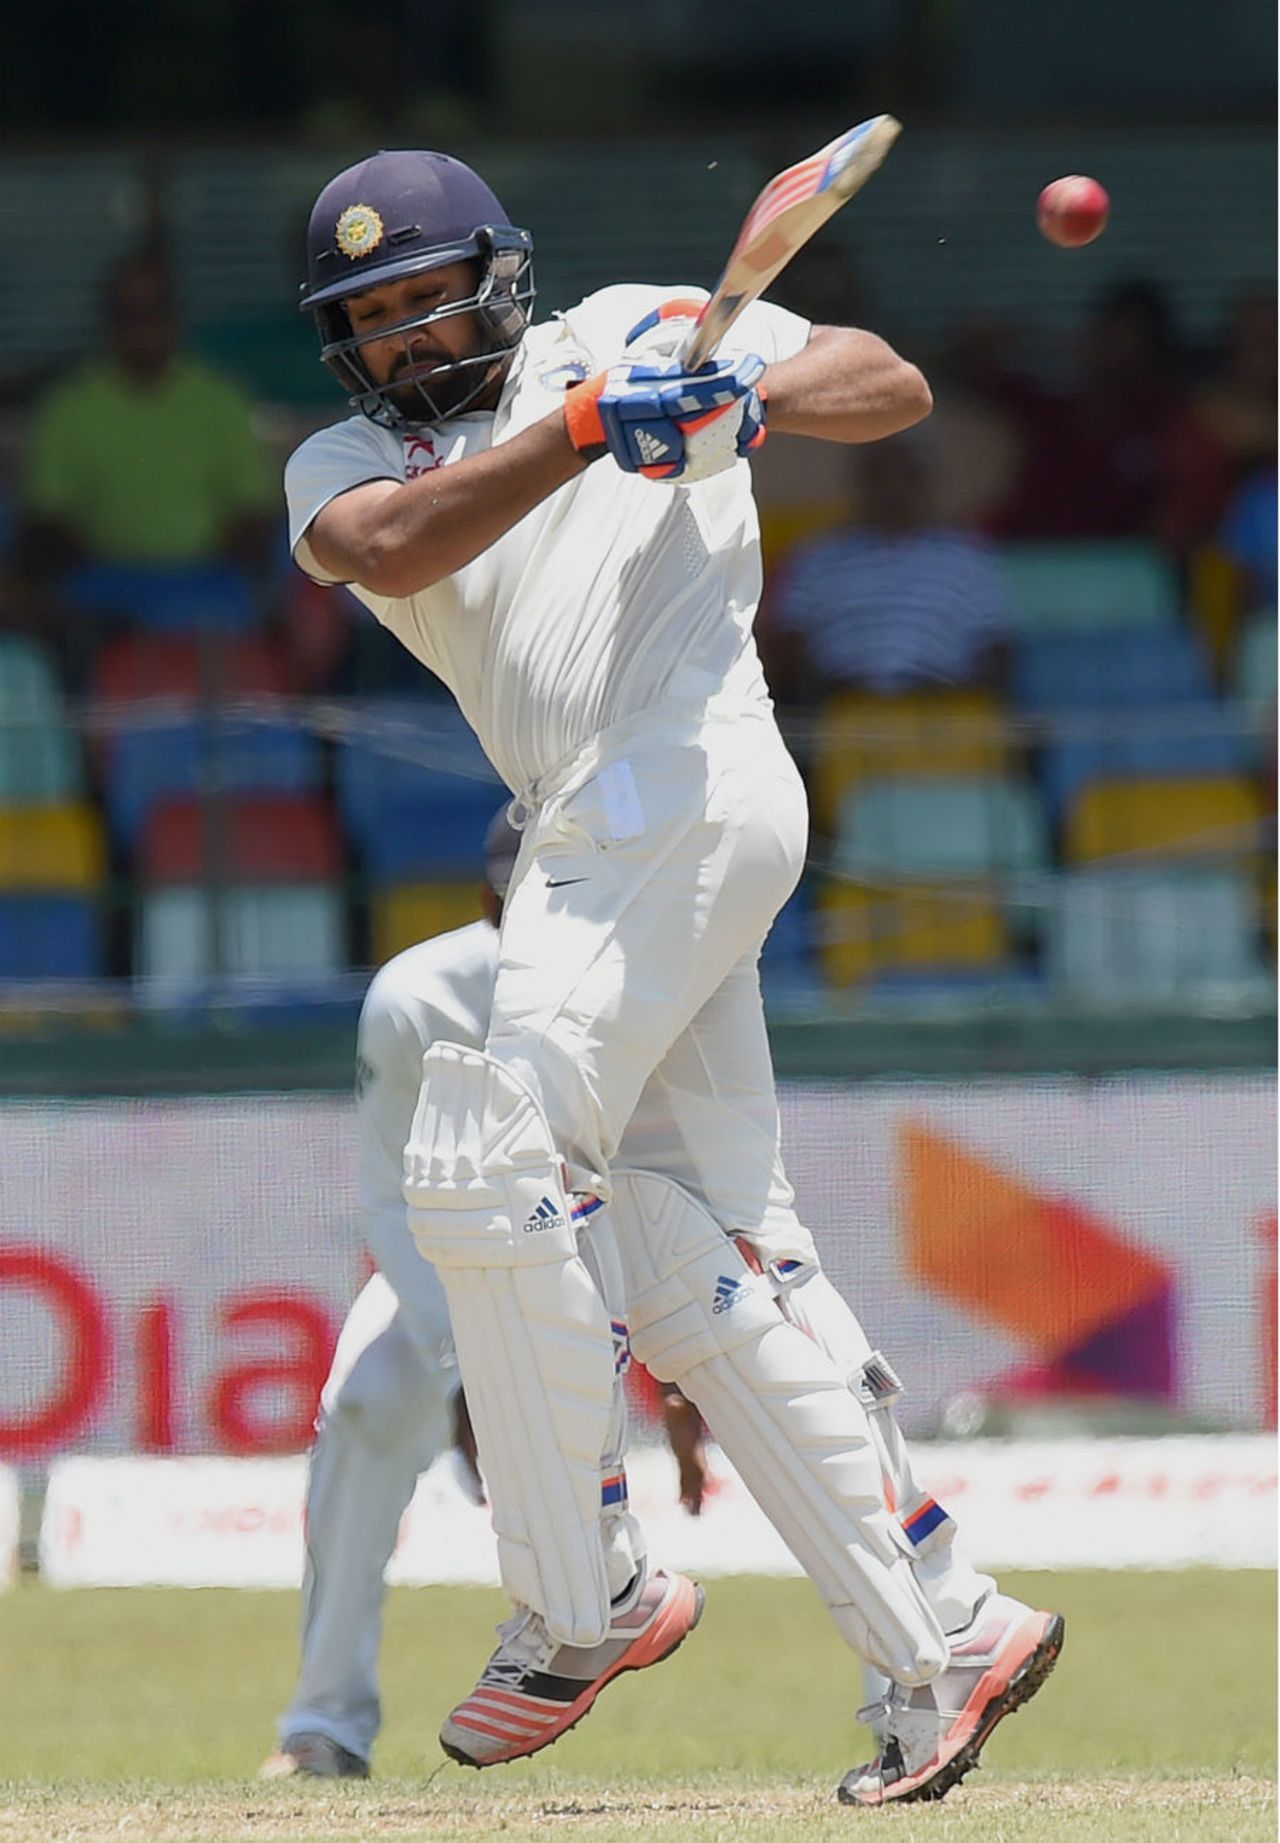 Rohit Sharma deals with a rising delivery, Sri Lanka v India, 3rd Test, SSC, Colombo, 2nd day, August 29, 2015